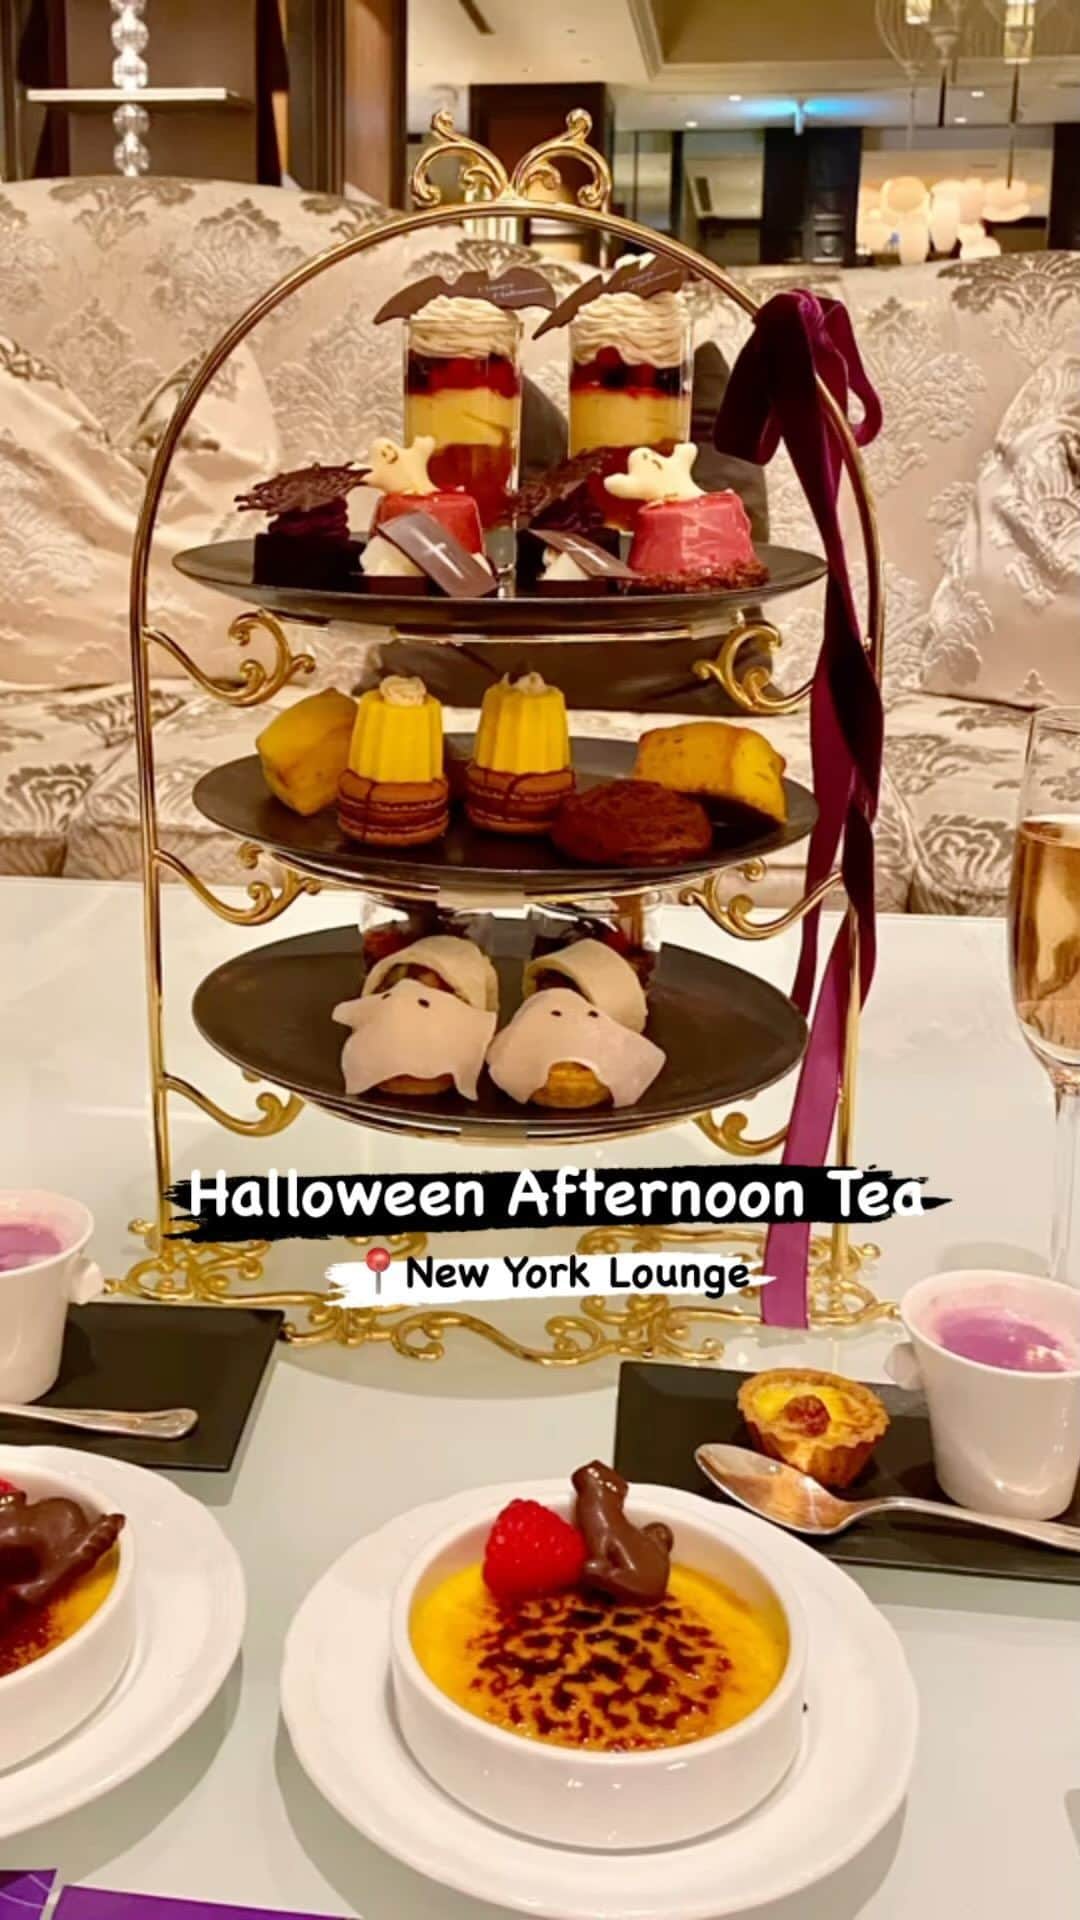 InterContinental Tokyo Bayのインスタグラム：「. ニューヨークラウンジでは、ハロウィンデコレーションされたスイーツやセイボリー、秋の味覚のモンブラン、フルーツが楽しめるアフタヌーンティーを提供中👻  スペシャルディッシュとして、パンプキンブリュレをお届けいたします。  優雅な空間が広がるニューヨークラウンジでハロウィンパーティーをお楽しみください💕  “Halloween Afternoon Tea” is available for purchase at New York Lounge from September 1st, featuring an exquisite array of Halloween-inspired sweets and savory items that made by autumn ingredients such as pumpkin, purple sweet potato and more. Please enjoy an elegant and playful Halloween with our seasonal afternoon tea.  #ホテルインターコンチネンタル東京ベイ #インターコンチネンタル東京ベイ #intercontinentaltokyobay #intercontinental #intercontinentallife #アフタヌーンティー #アフヌン #ヌン活 #アフタヌーンティー巡り #ハロウィン #halloween  #ハロウィンアフタヌーンティー  #afternoontea #モンスター  #黒猫 #オバケ #おばけ  #血糊 #秋の味覚 #スイーツ巡り #newyorklounge #ニューヨークラウンジ #モンブラン #和栗 #紫芋 #カシスムース  #パンプキンブリュレ」